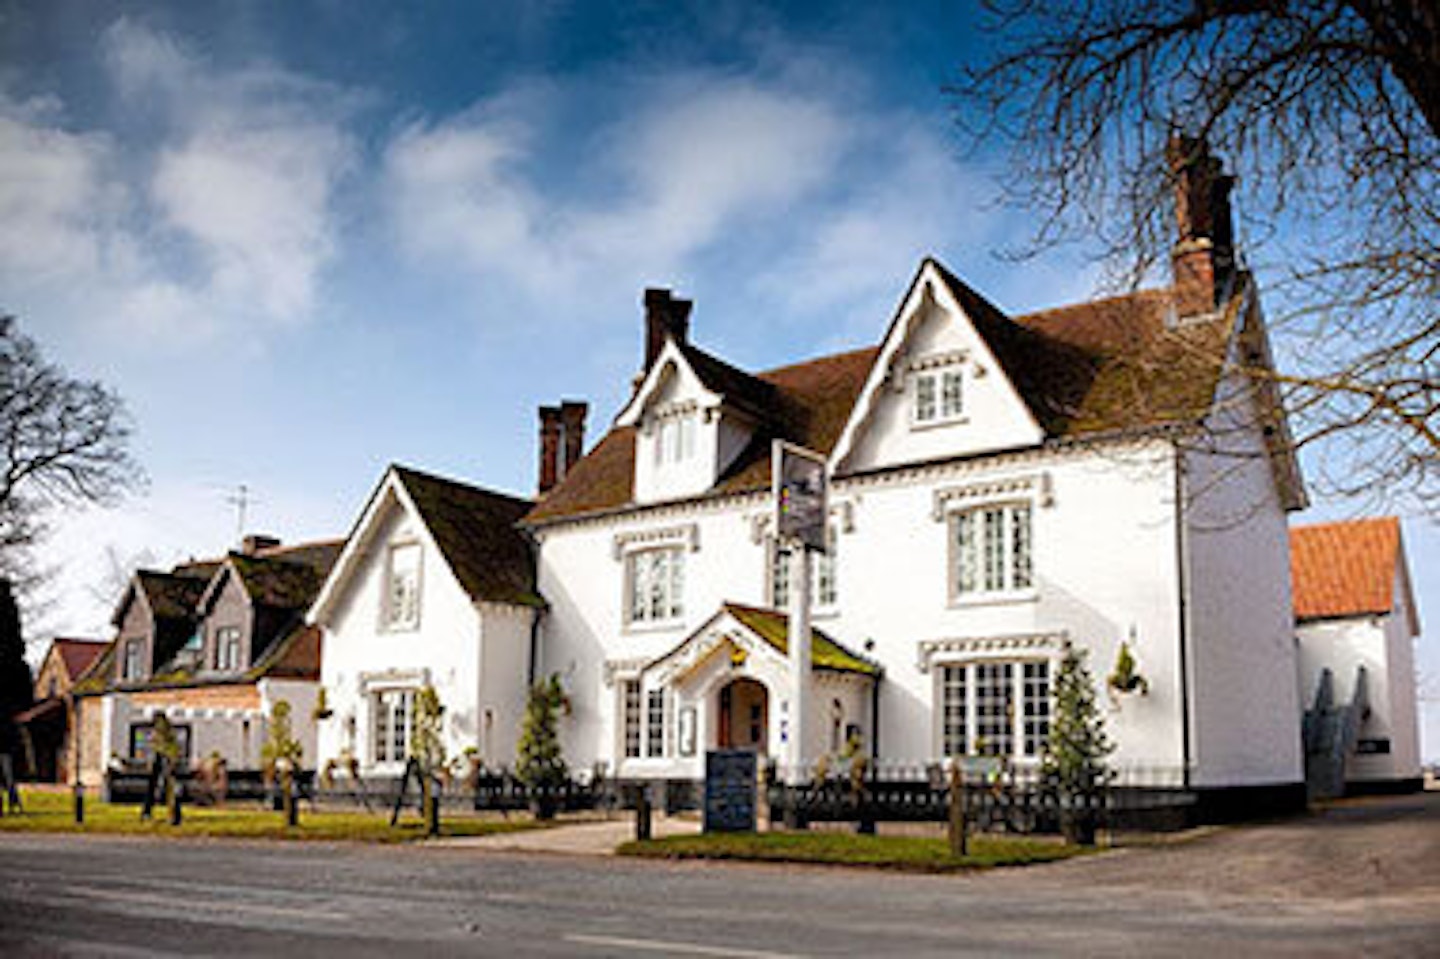 THE KINGS HEAD COUNTRY HOTEL